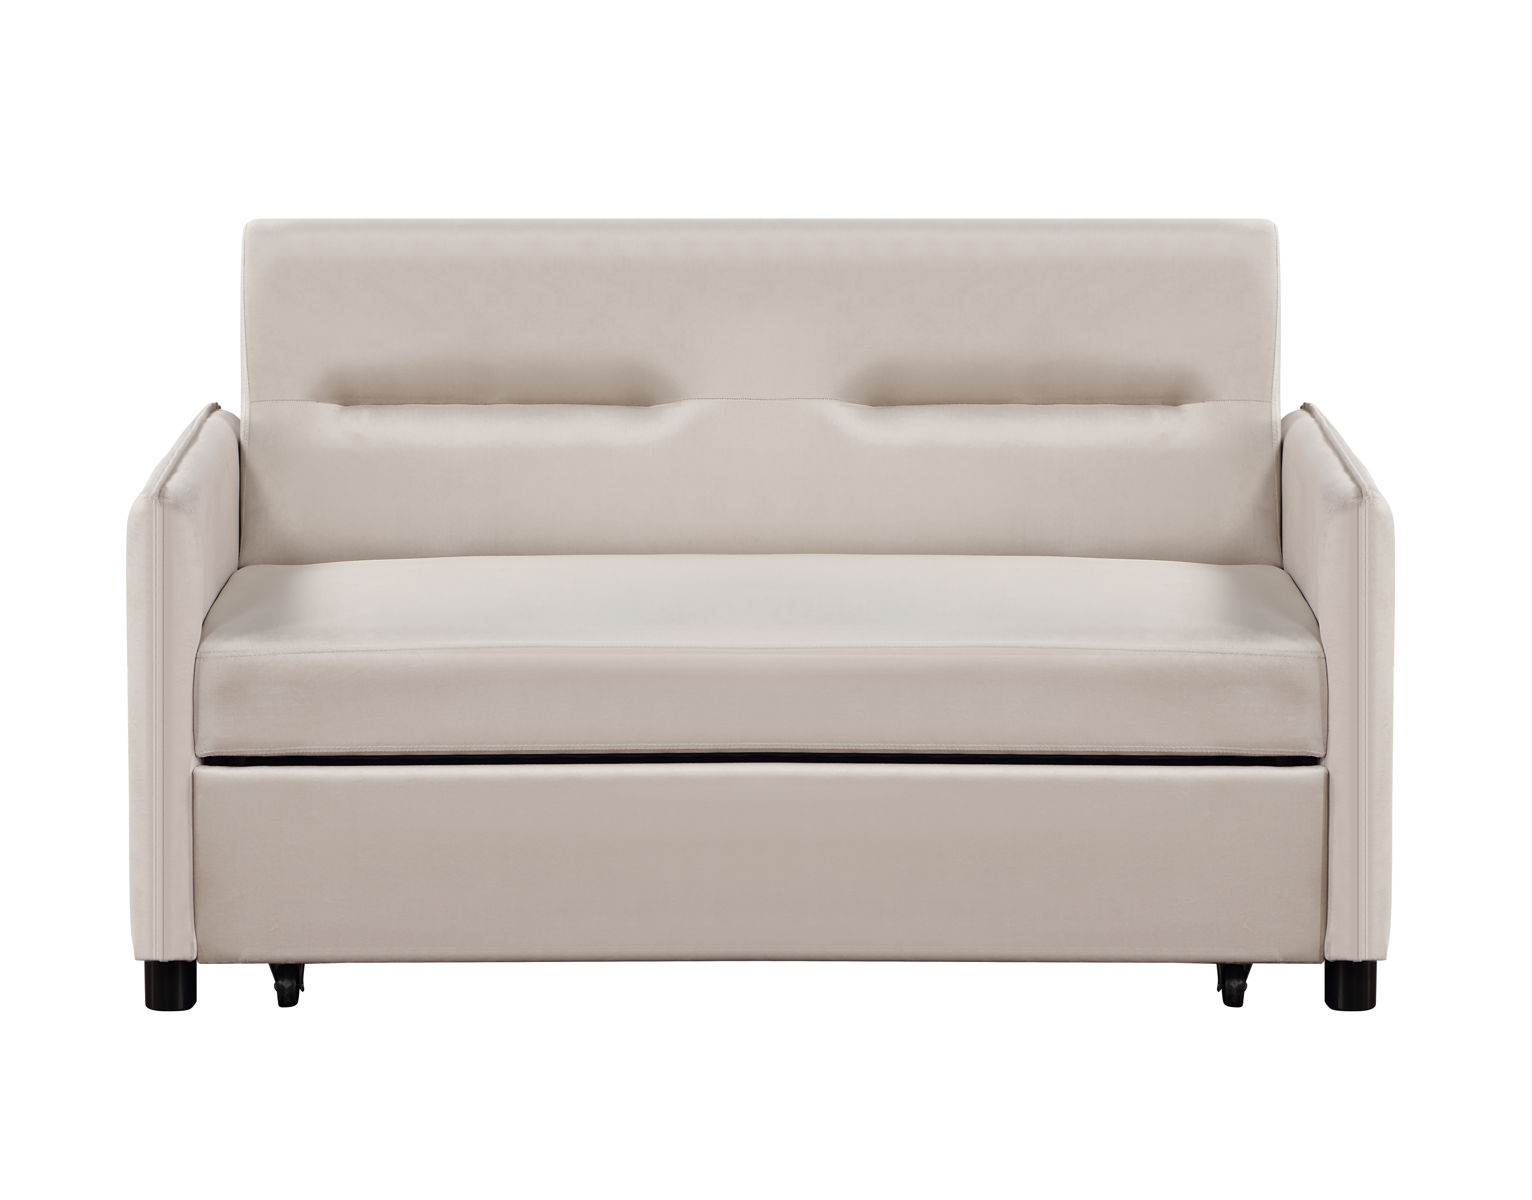 Upholstered Sleeper Sofa 2 Seat Sofabed With 2 Grey Pillow, Beige